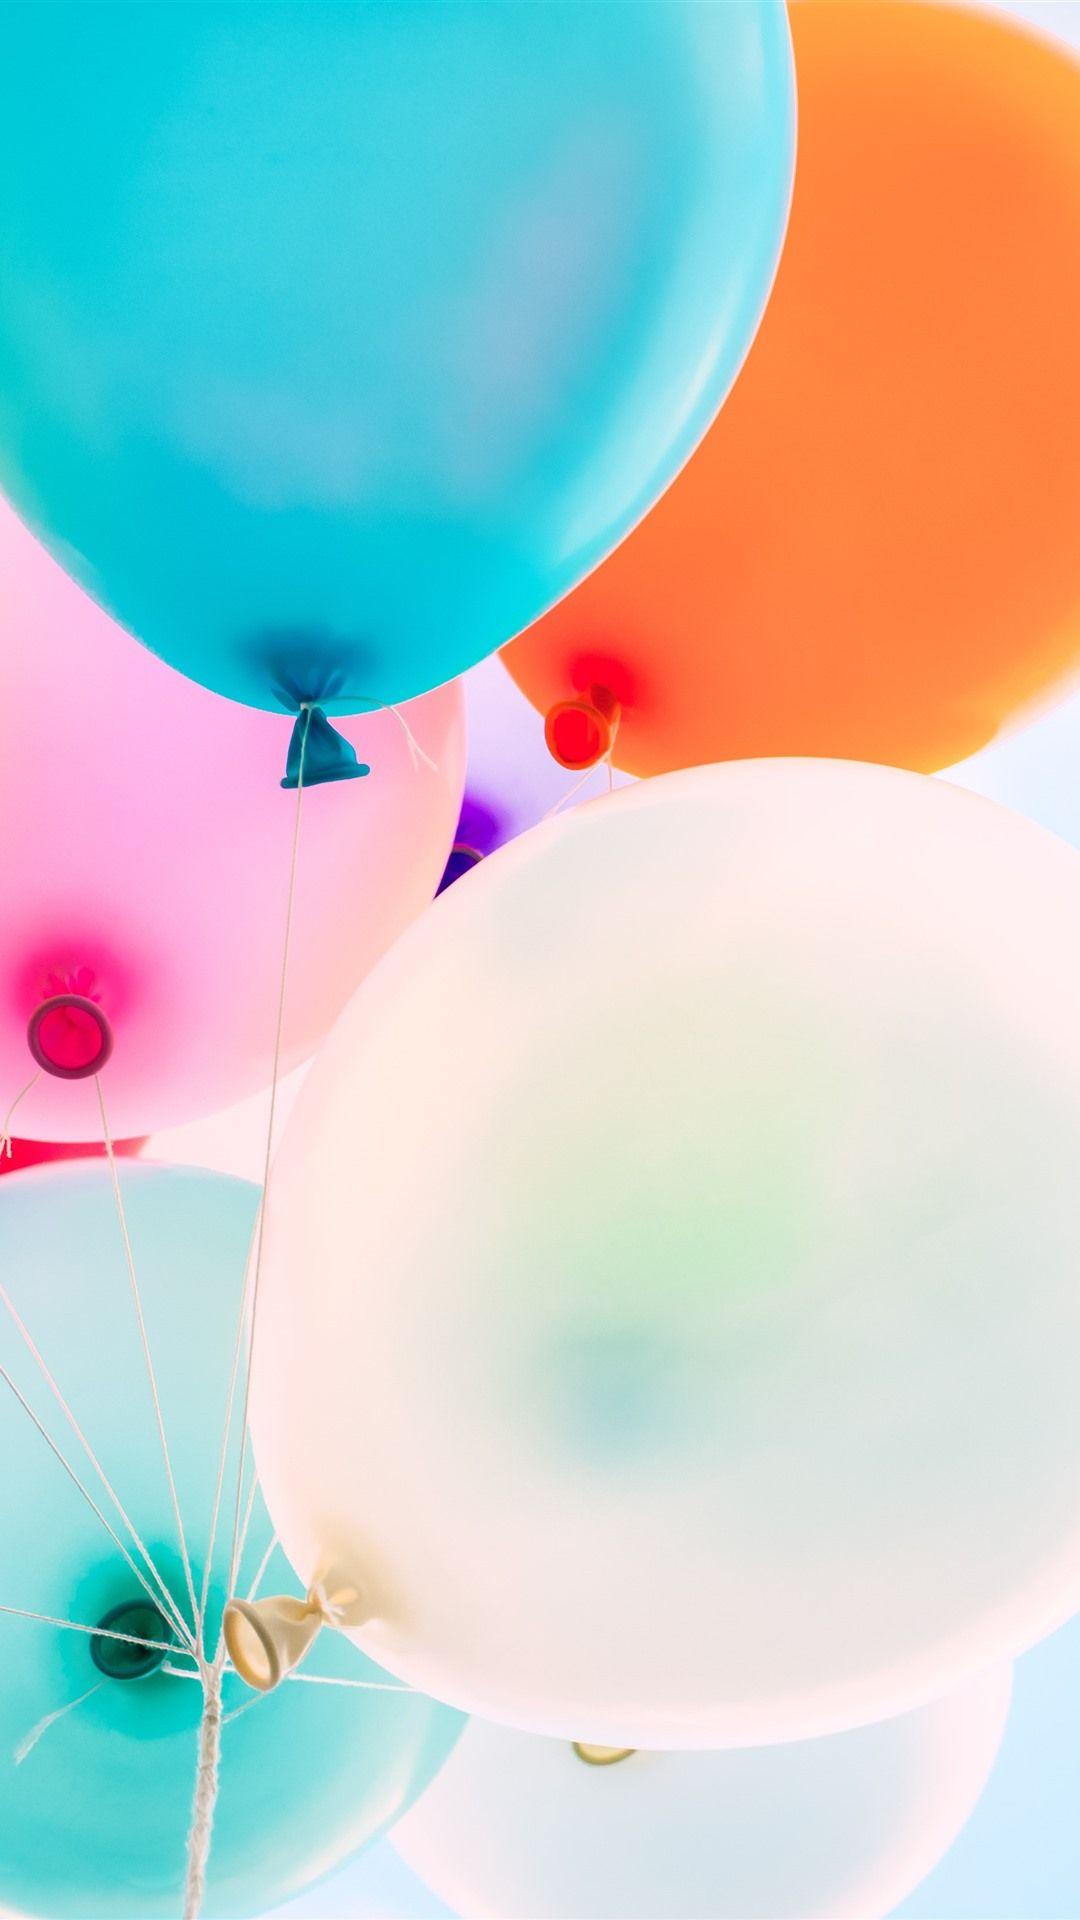 Balloon Background Images | Free iPhone & Zoom HD Wallpapers & Vectors -  rawpixel